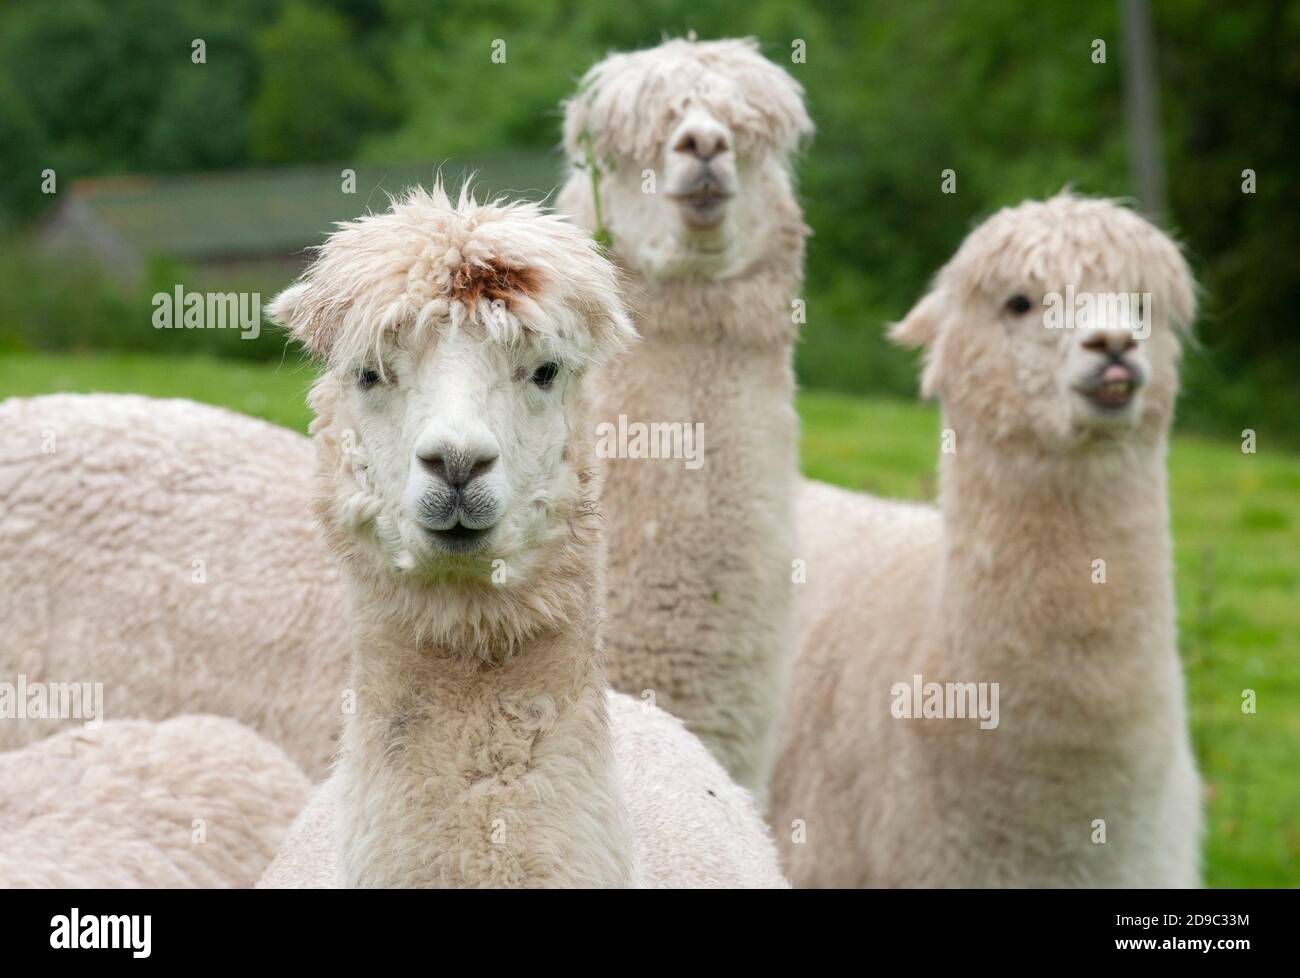 Alpacas (Vicugna pacos) - a species of South American camel being farmed for their wool at a farm in Nteherbury, Dorset, England, UK. Stock Photo